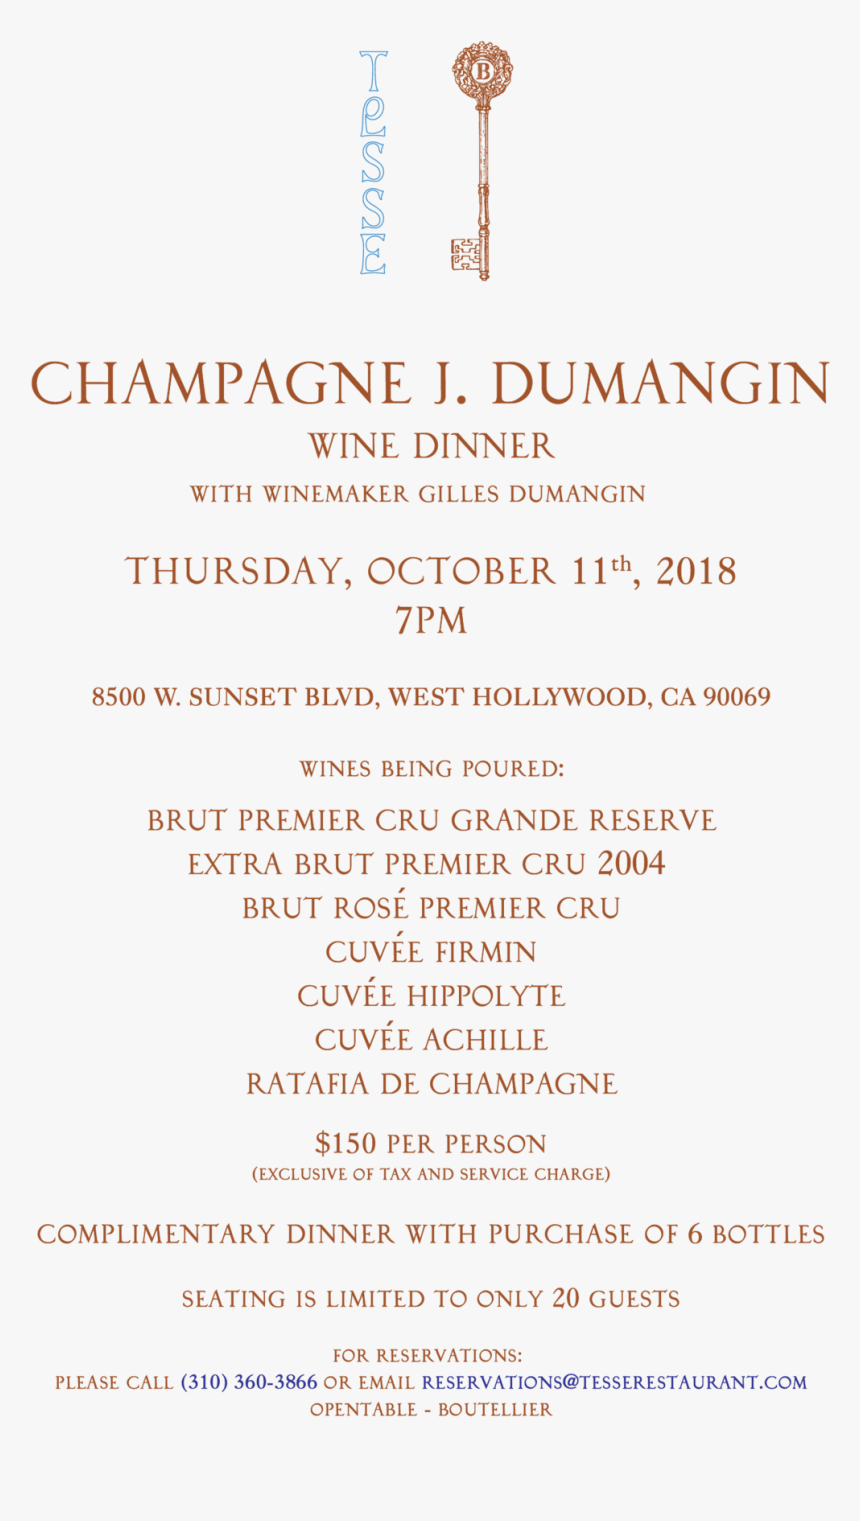 Champagne Dumangin Wine Dinner Invite, HD Png Download, Free Download